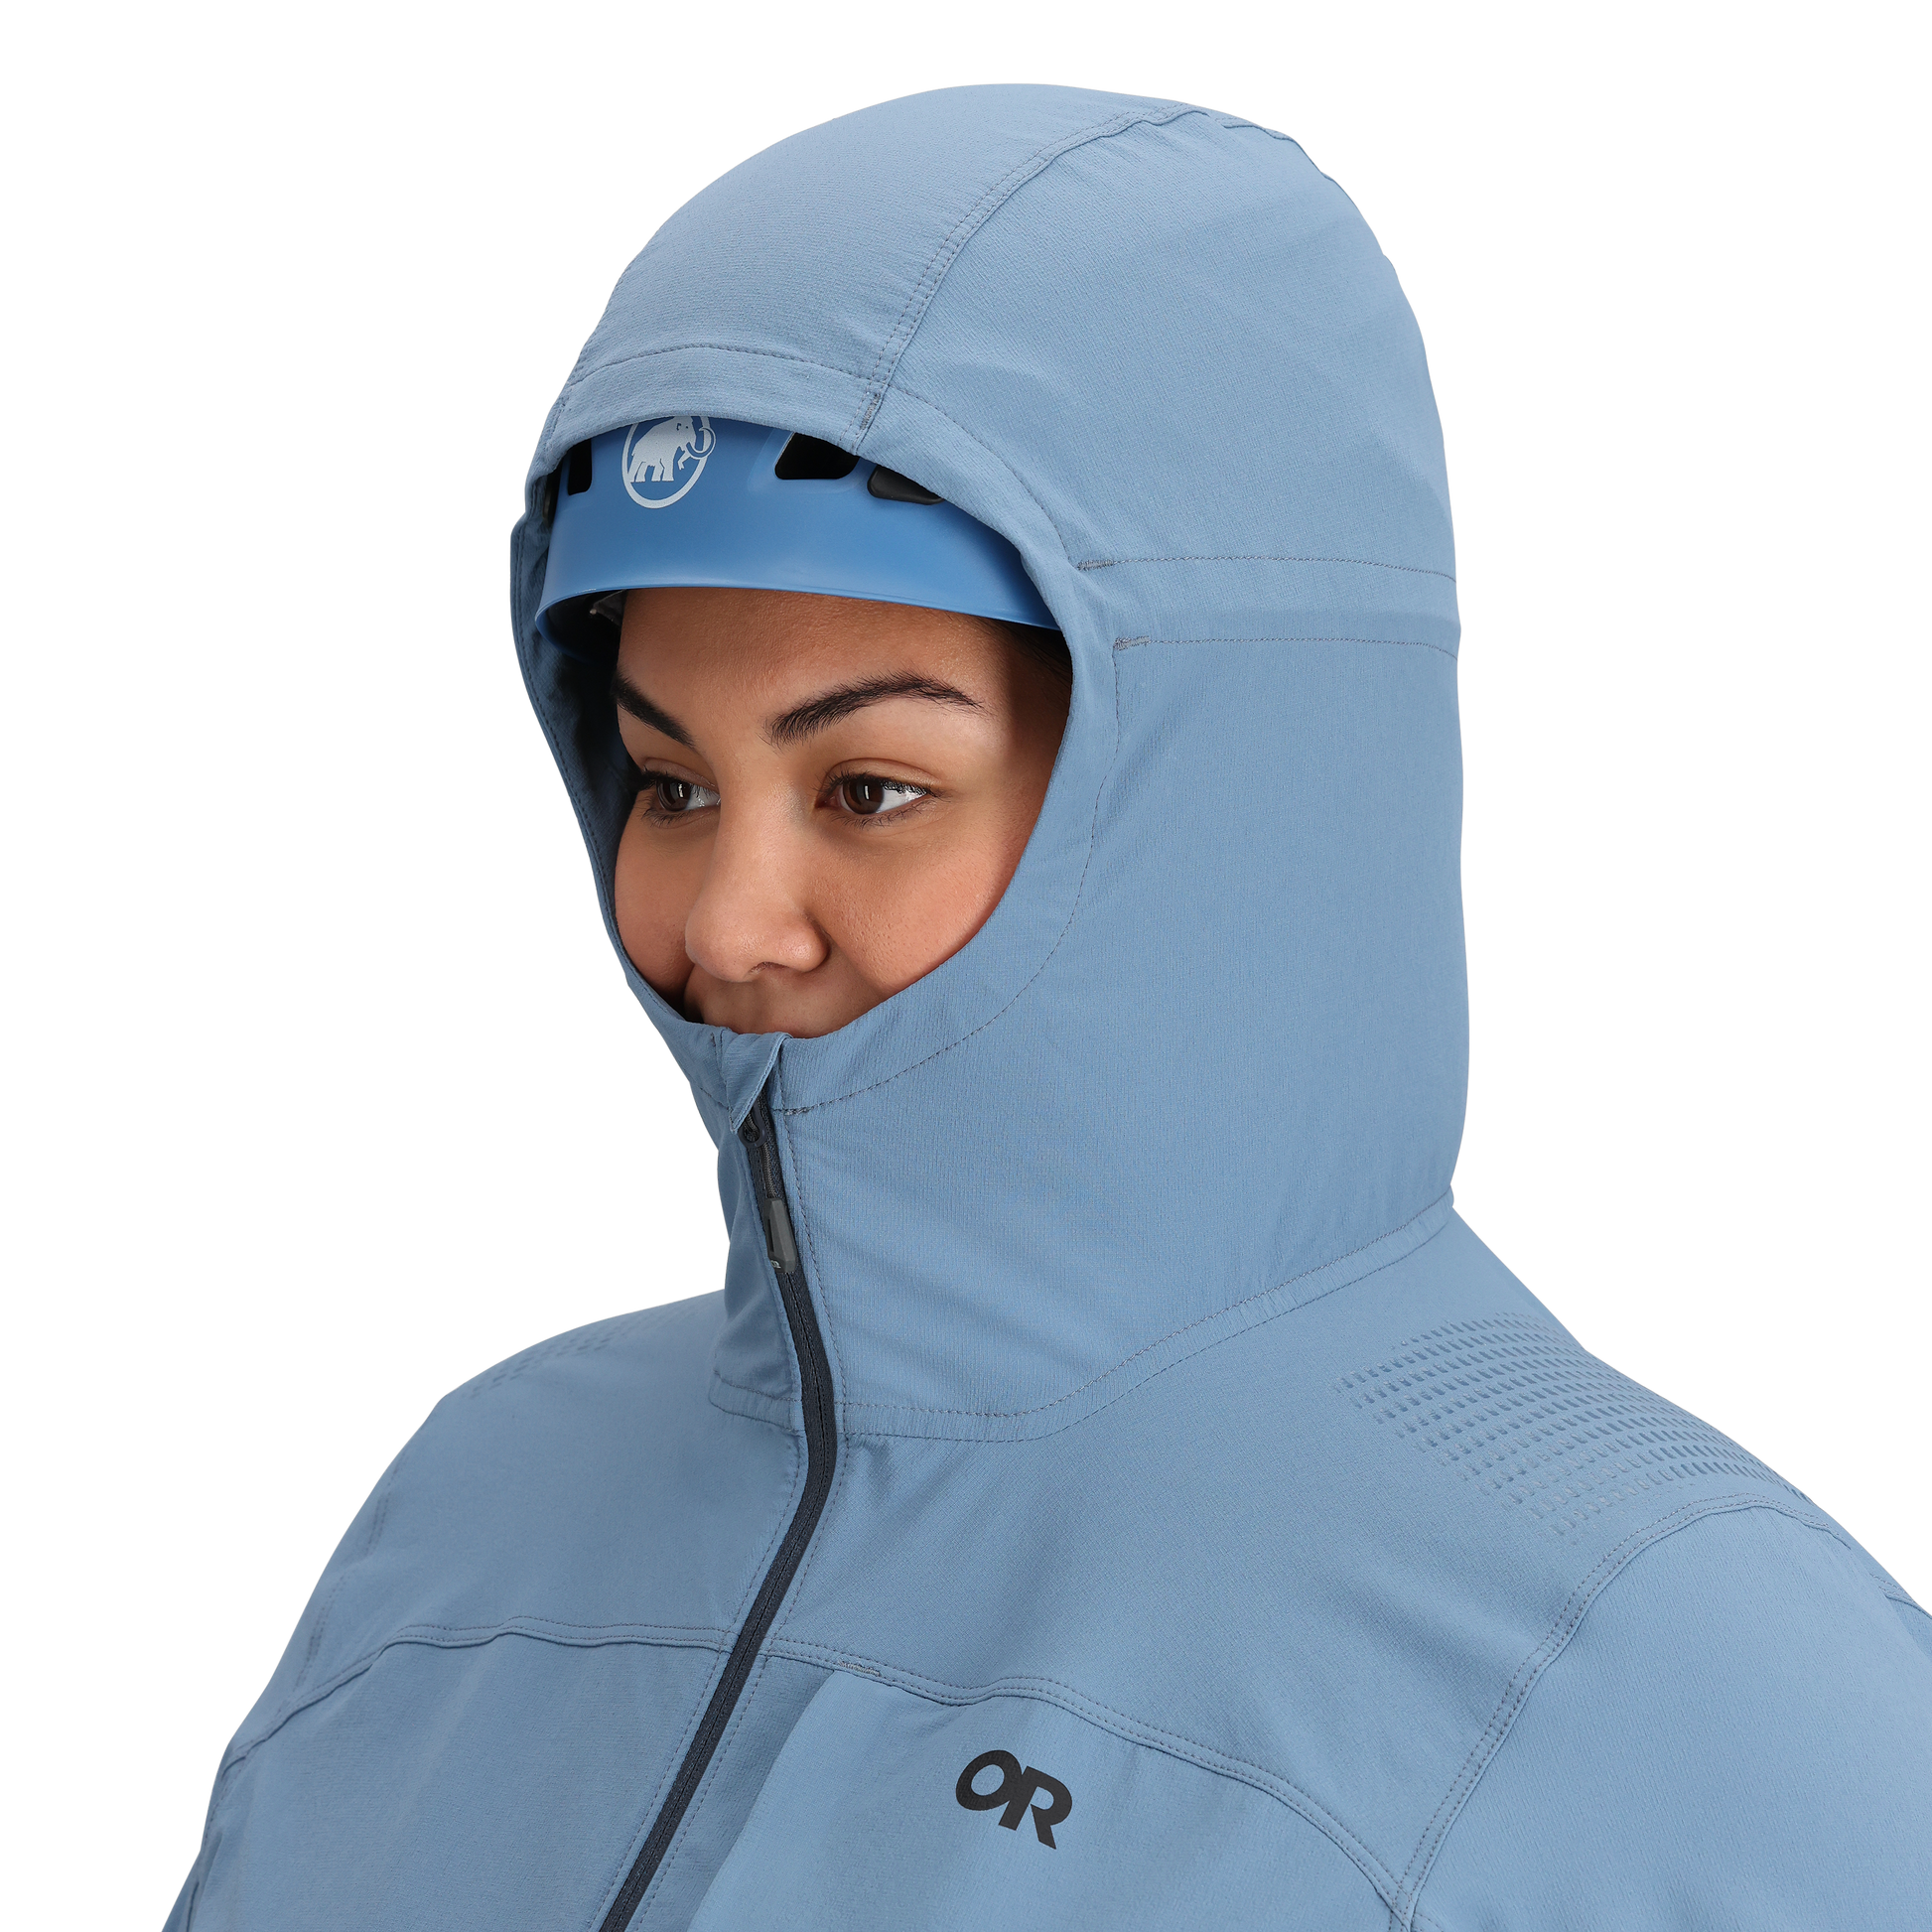 B3 :: Helmet Compatible / This hood is compatible with most helmet sizes, fitting over a skiing, biking, or climbing helmet.